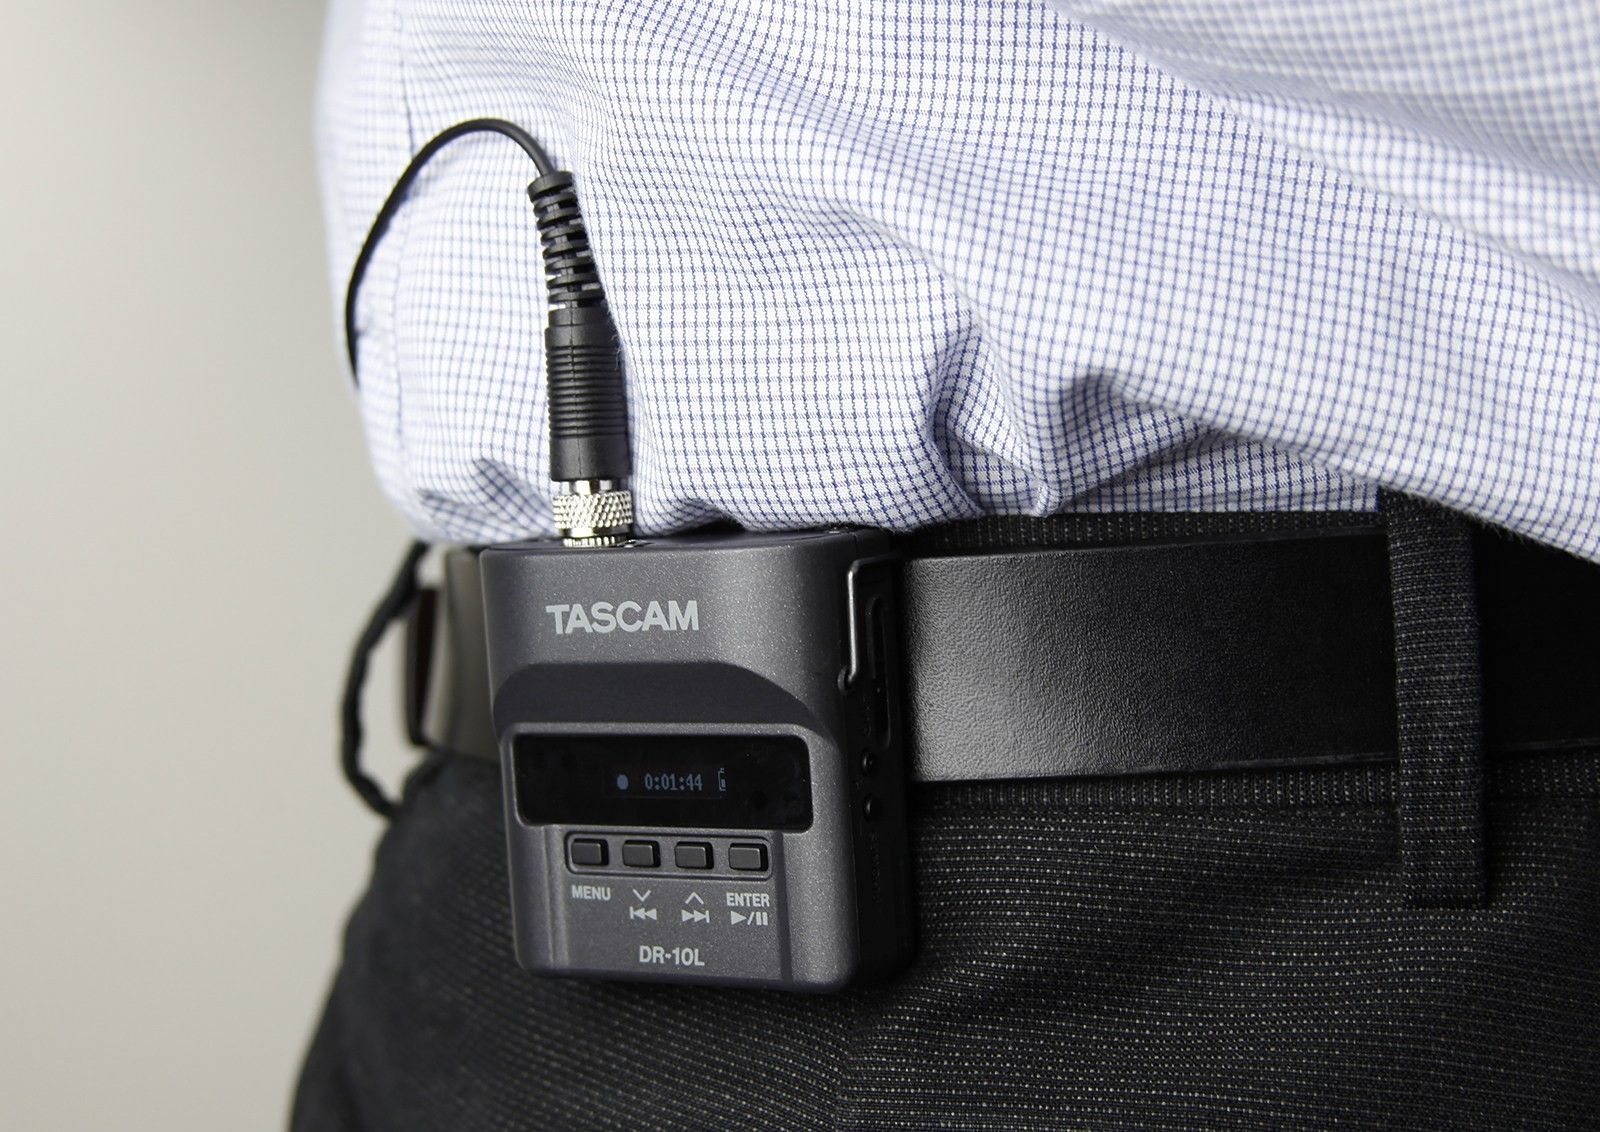 Tascam Wants to Change the Way We Record Lavalier Audio